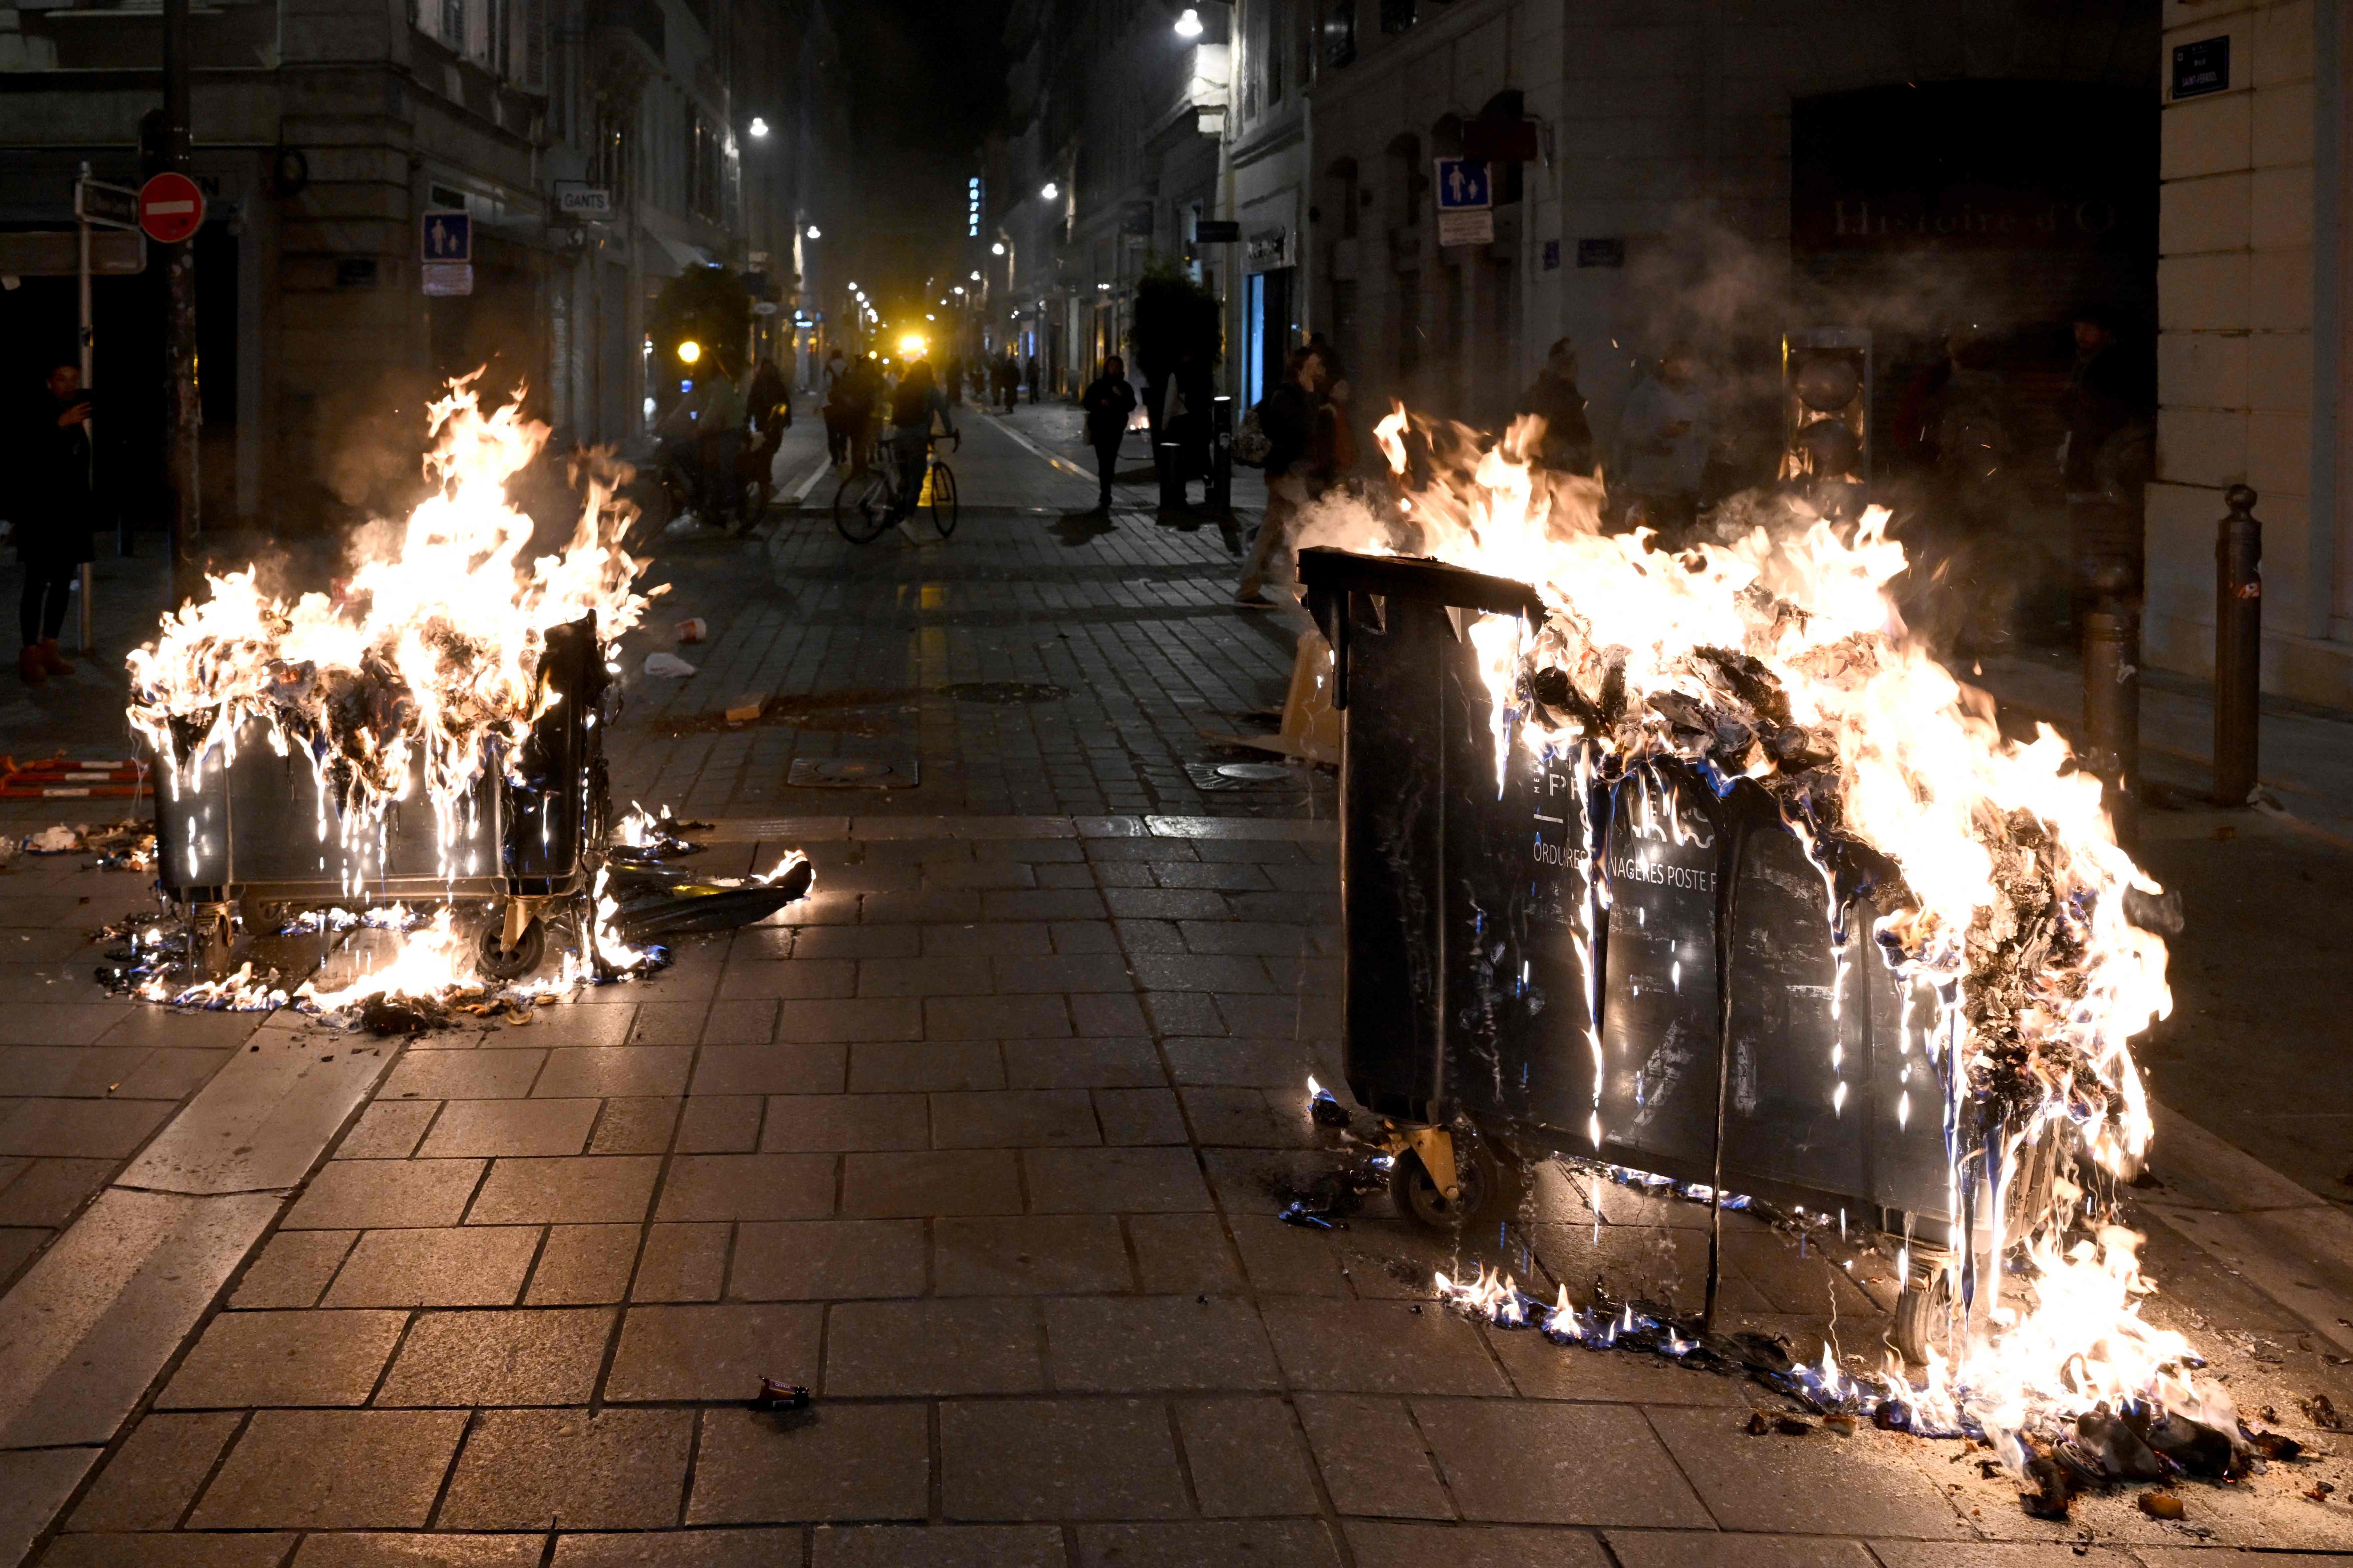 Household waste containers were set on fire during the protests